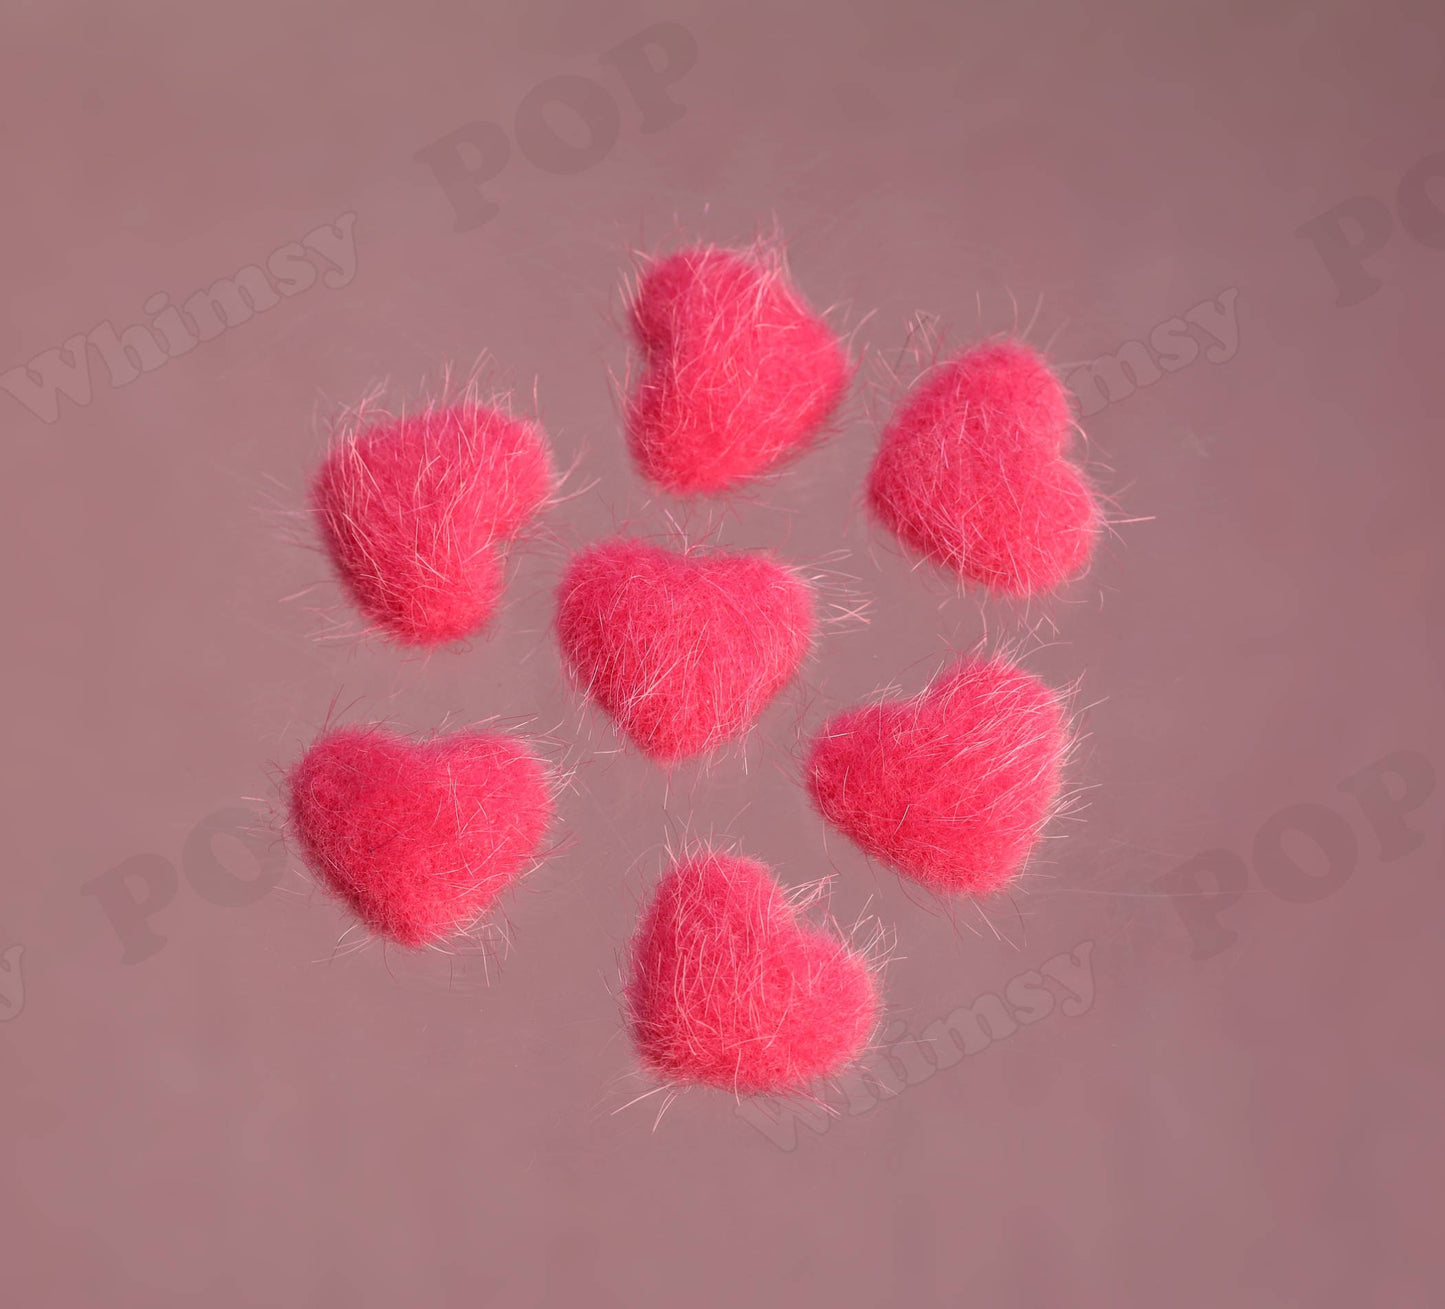 Colorful Plush Fuzzy Furry Heart Button Flatback Deco Cabochons, Heart Button Cabochons, Red Hearts, Pink Hearts, 17mm x 14mm (R7-018)